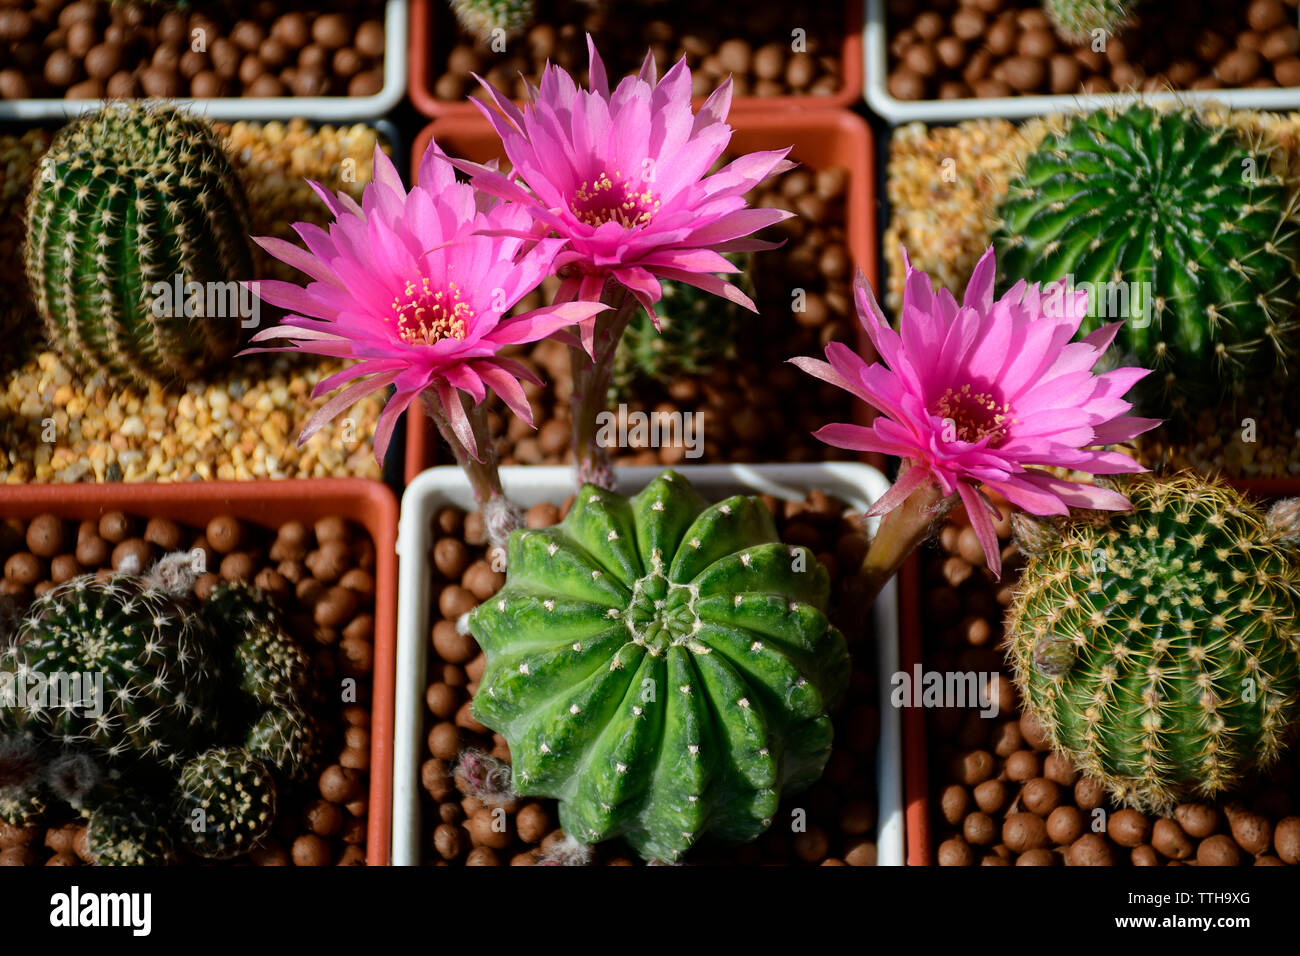 Pink flowers of hybrid cactus between Echinopsis and Lobivia with green and yellow variegated stem. Stock Photo